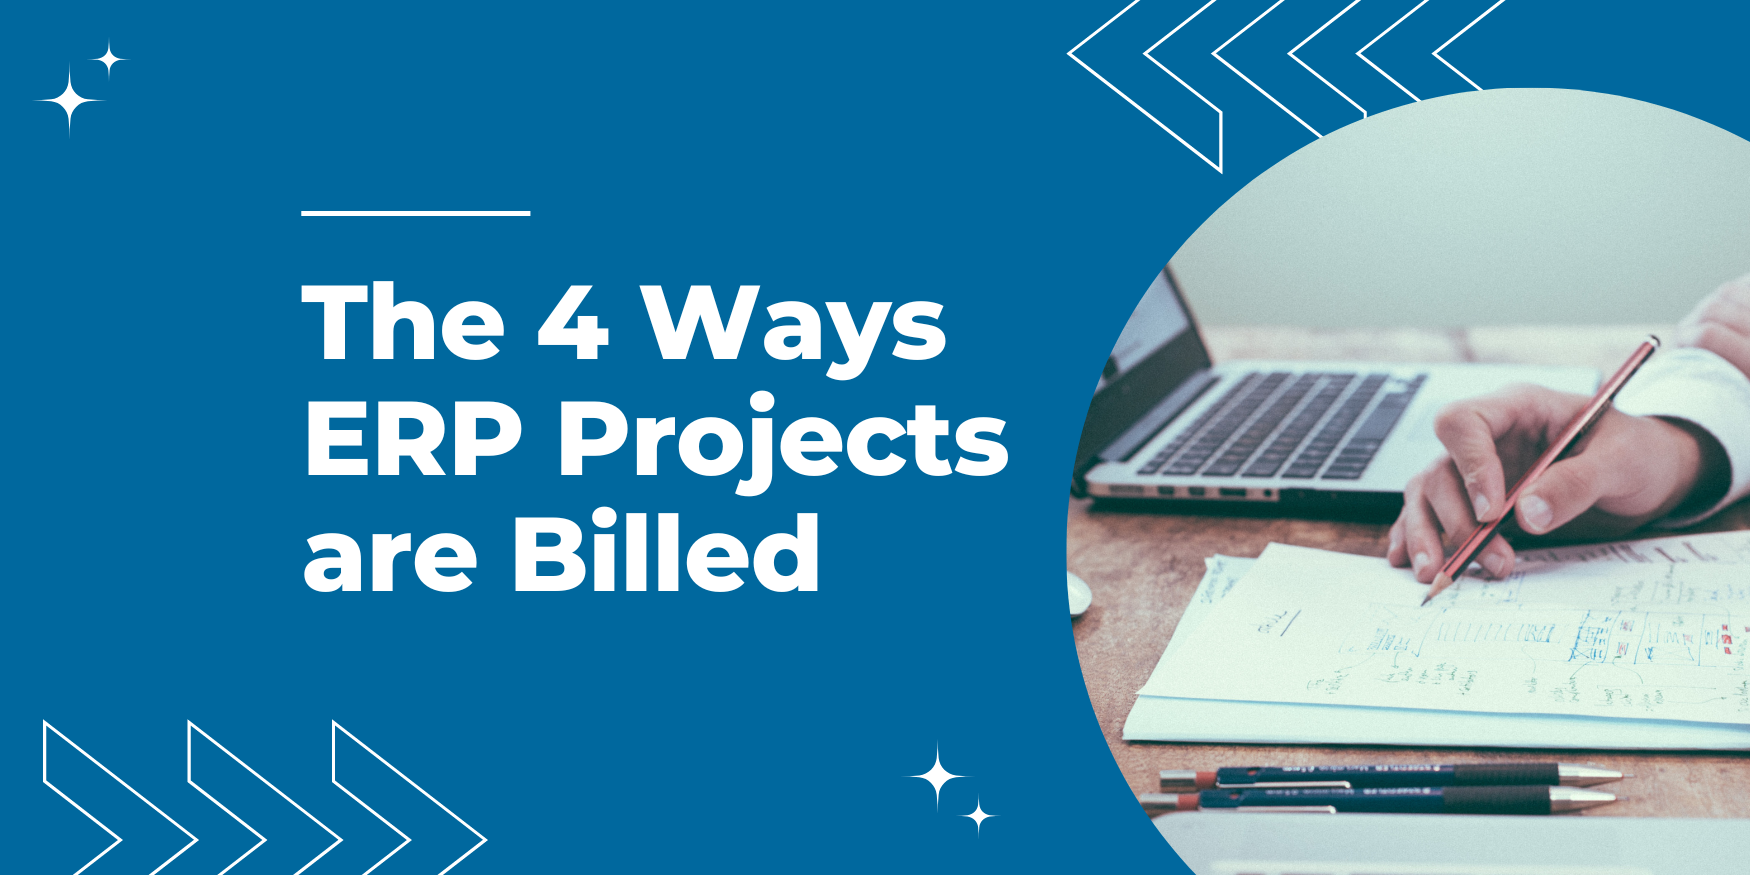 The 4 Ways ERP Projects are Billed